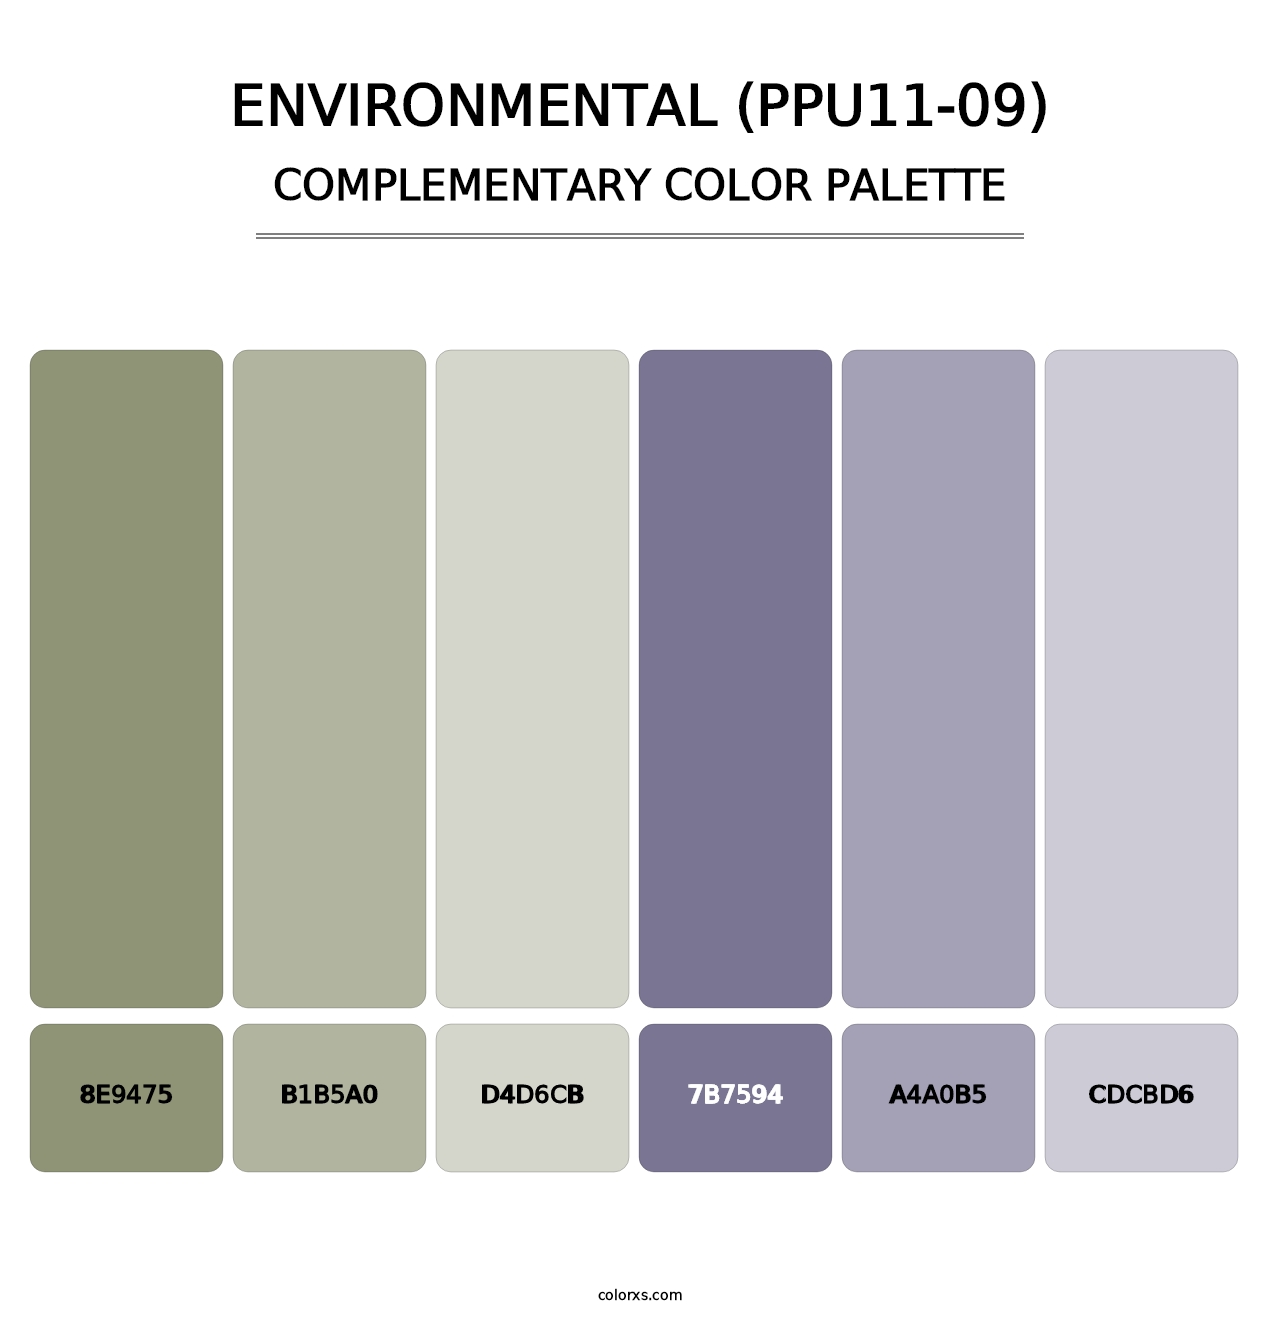 Environmental (PPU11-09) - Complementary Color Palette